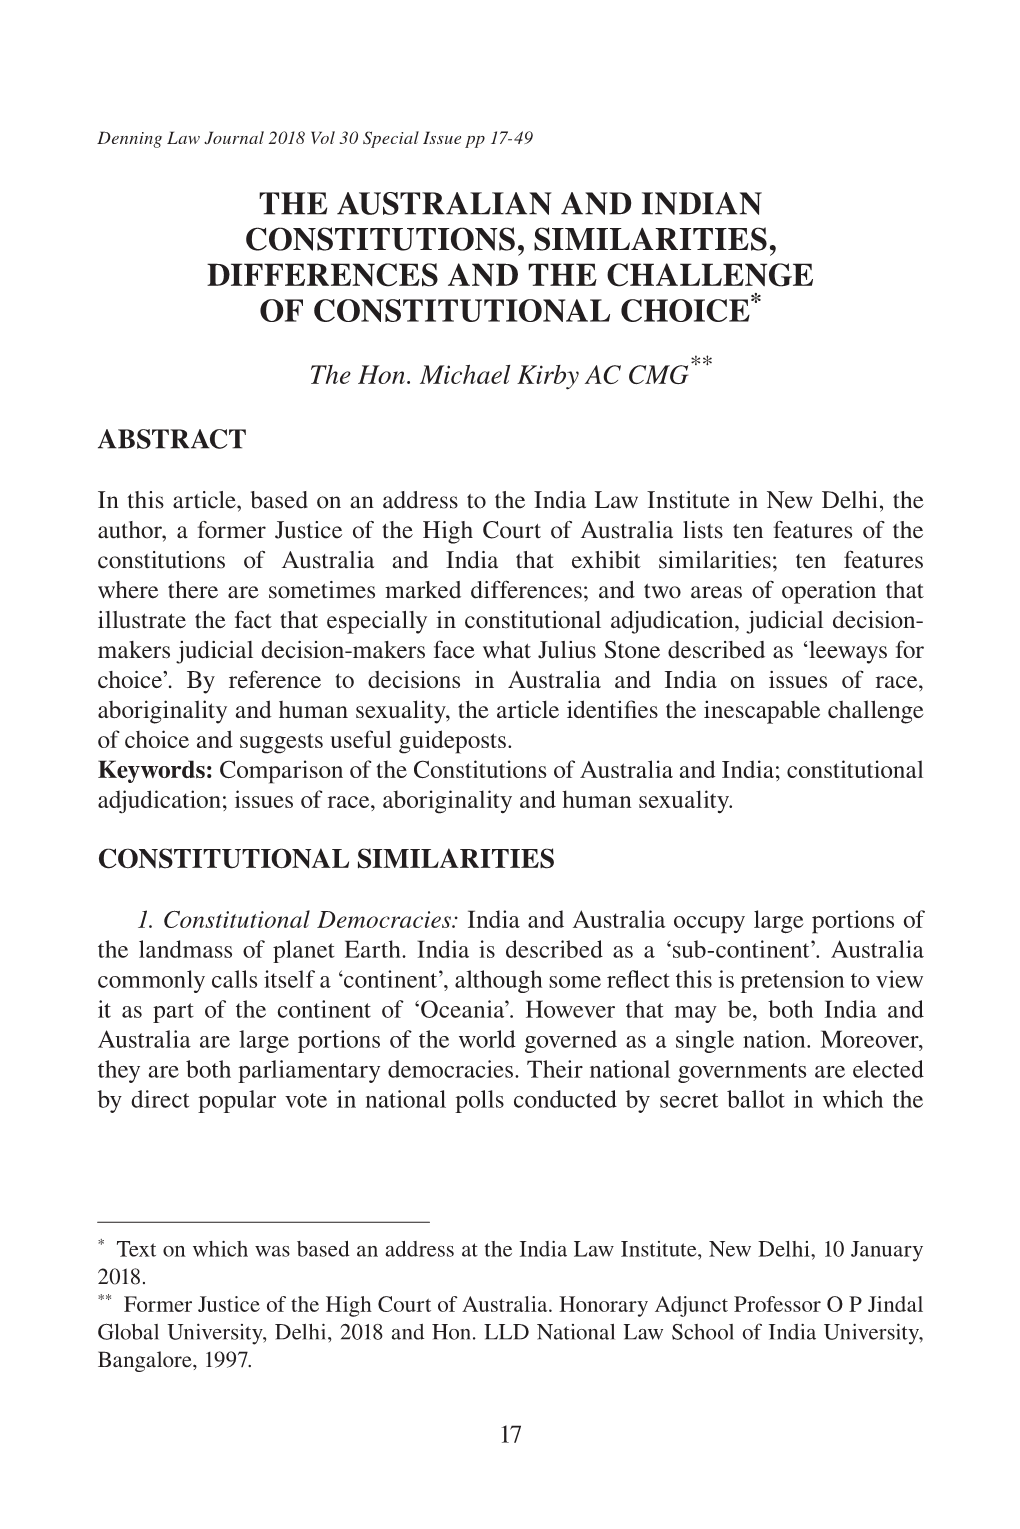 The Australian and Indian Constitutions, Similarities, Differences and the Challenge of Constitutional Choice*